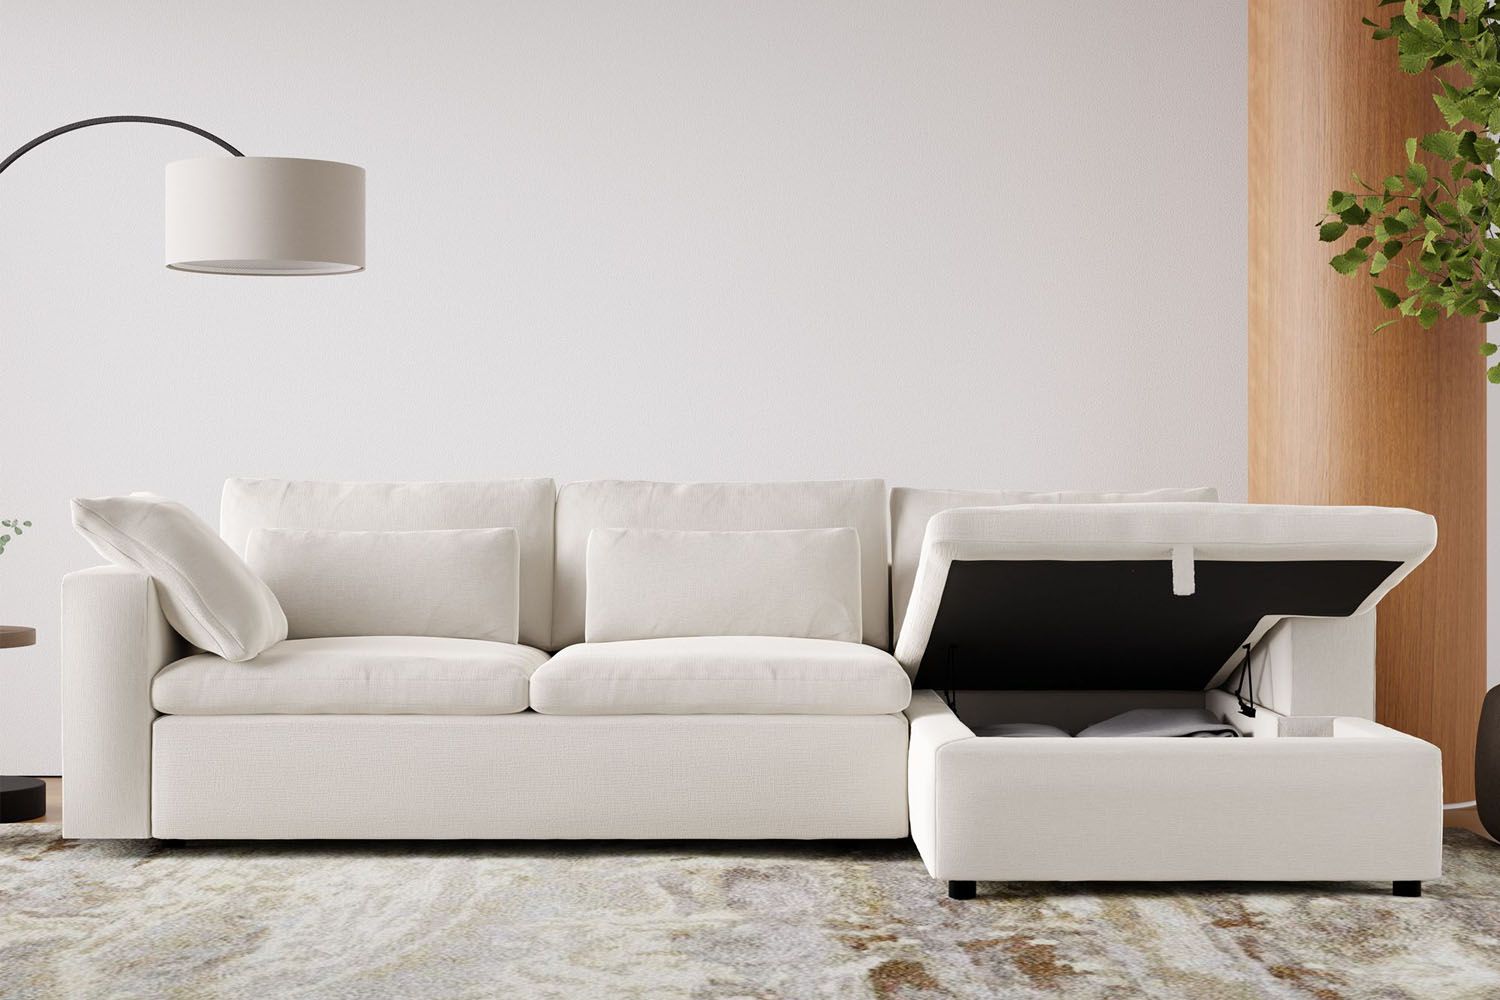 Sectional Sofas With Storage For Families: 10 Easy Pieces Regarding Sectional Sofa With Storage (Photo 12 of 15)